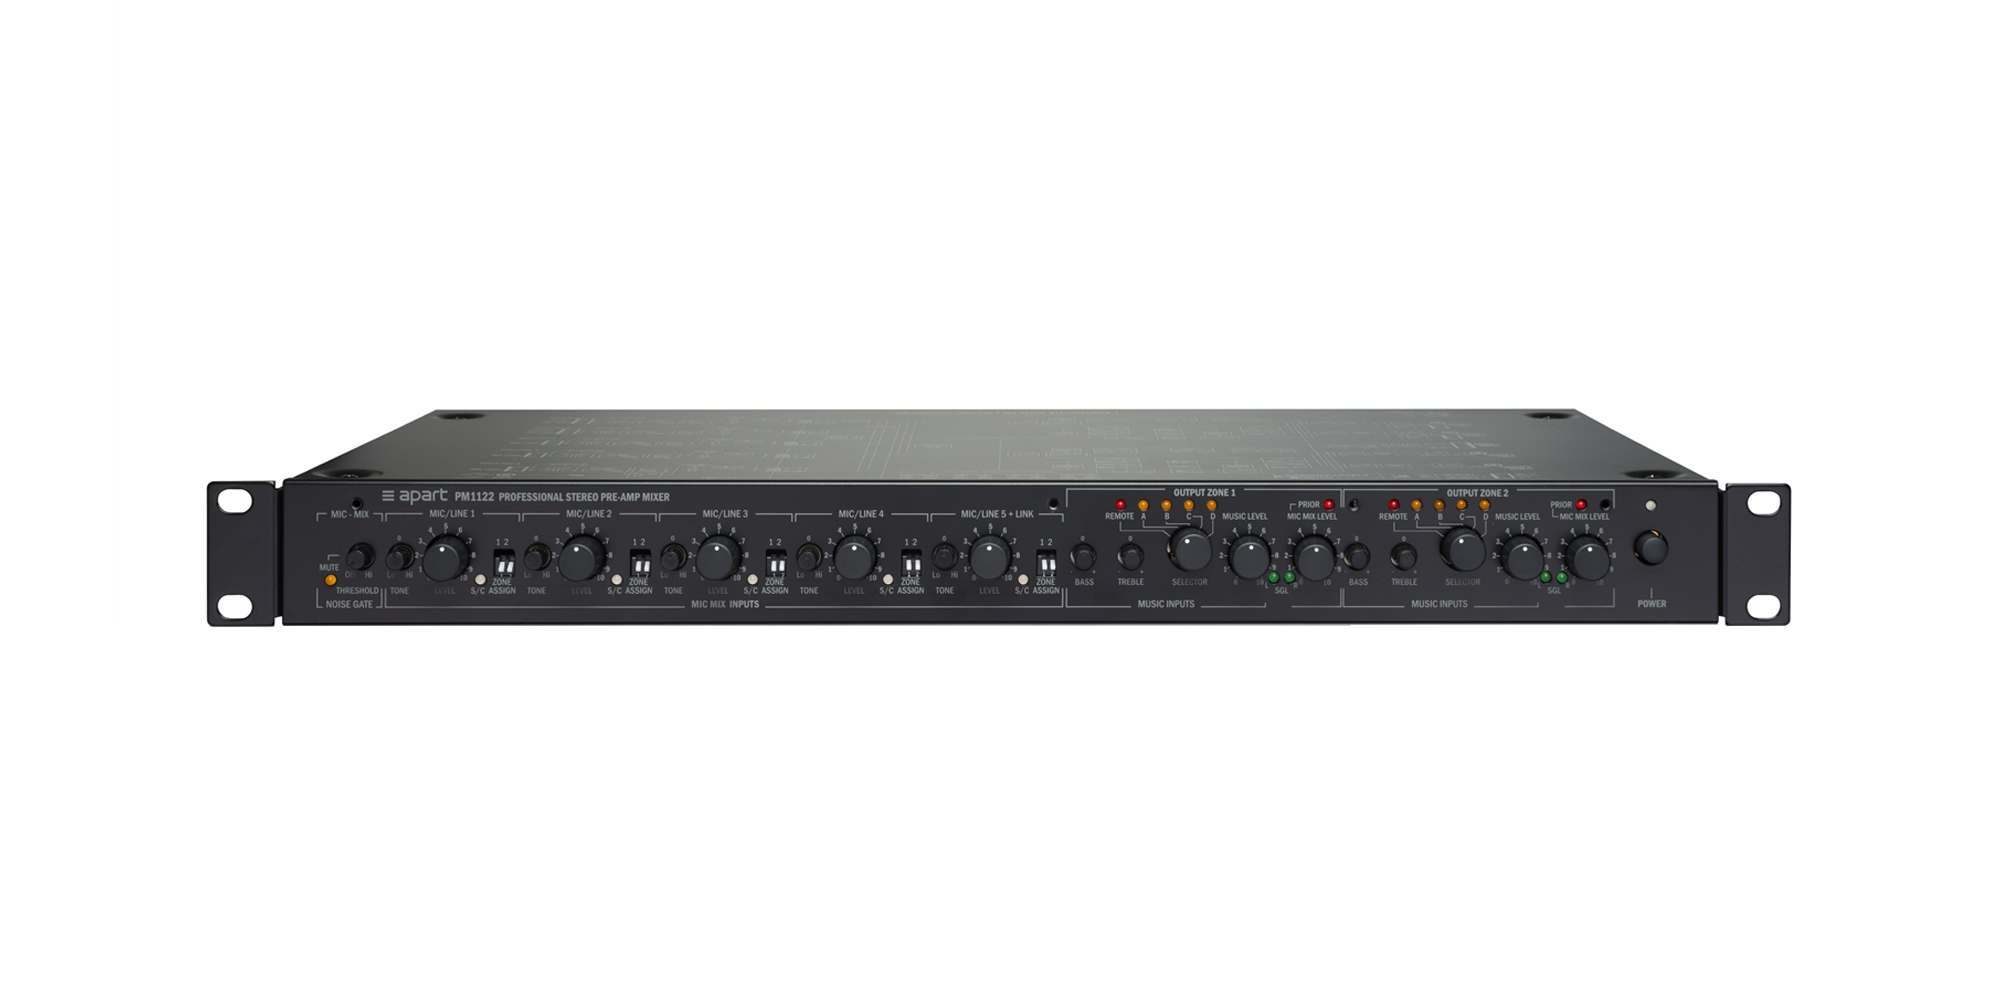 PM1122 2 stereo output zones and up to 10 inputs